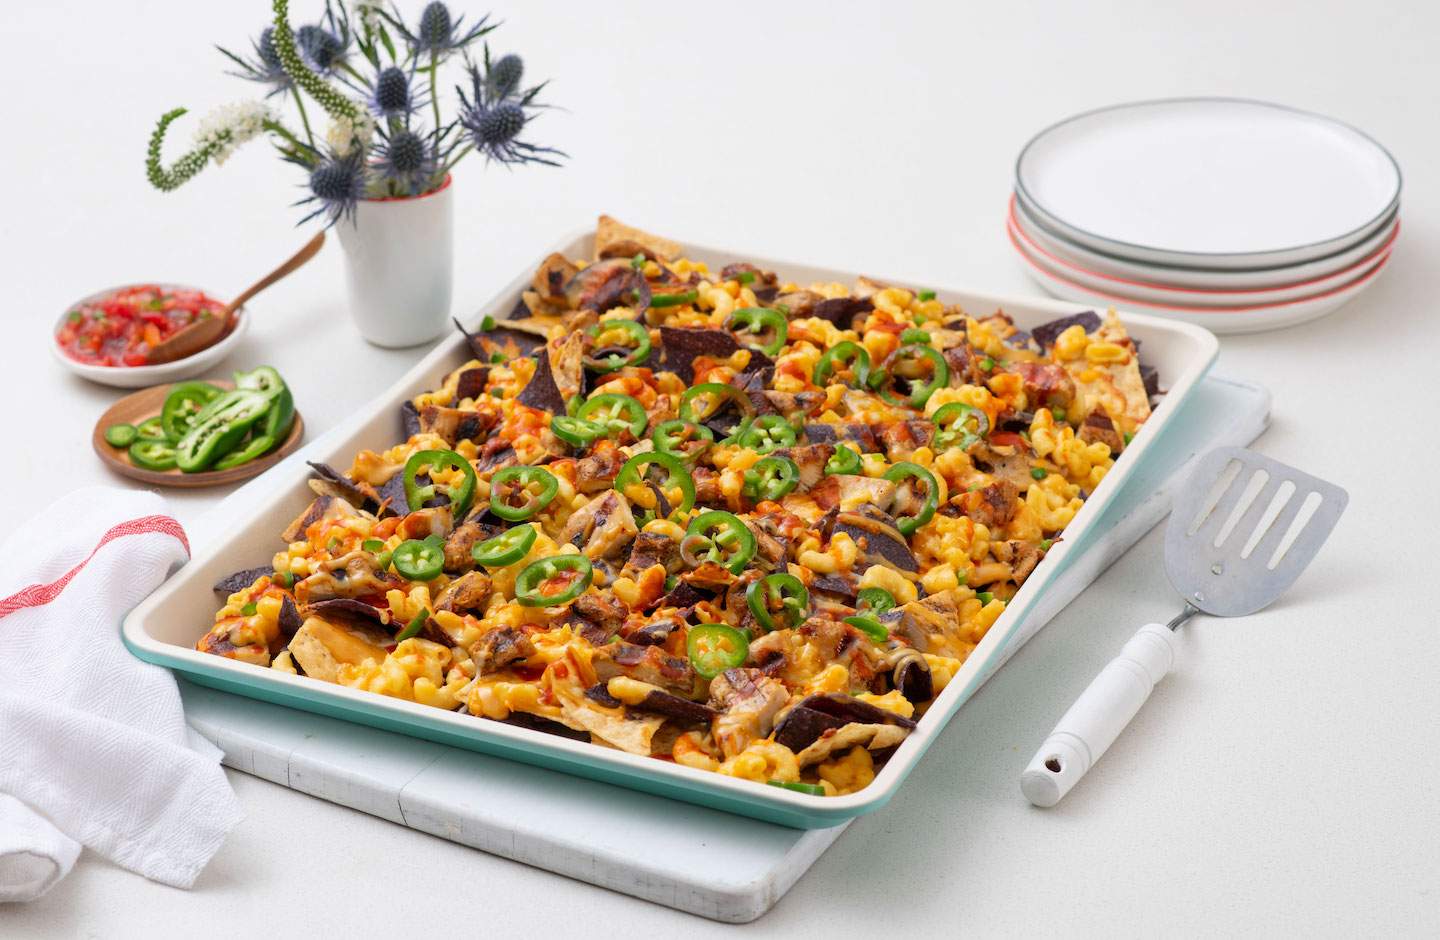 One of the recipes from the new Chick-fil-A Shared Table program digital cookbook "Extra Helpings" featuring leftover Chick-fil-A Grilled Nuggets and Mac and Cheese.